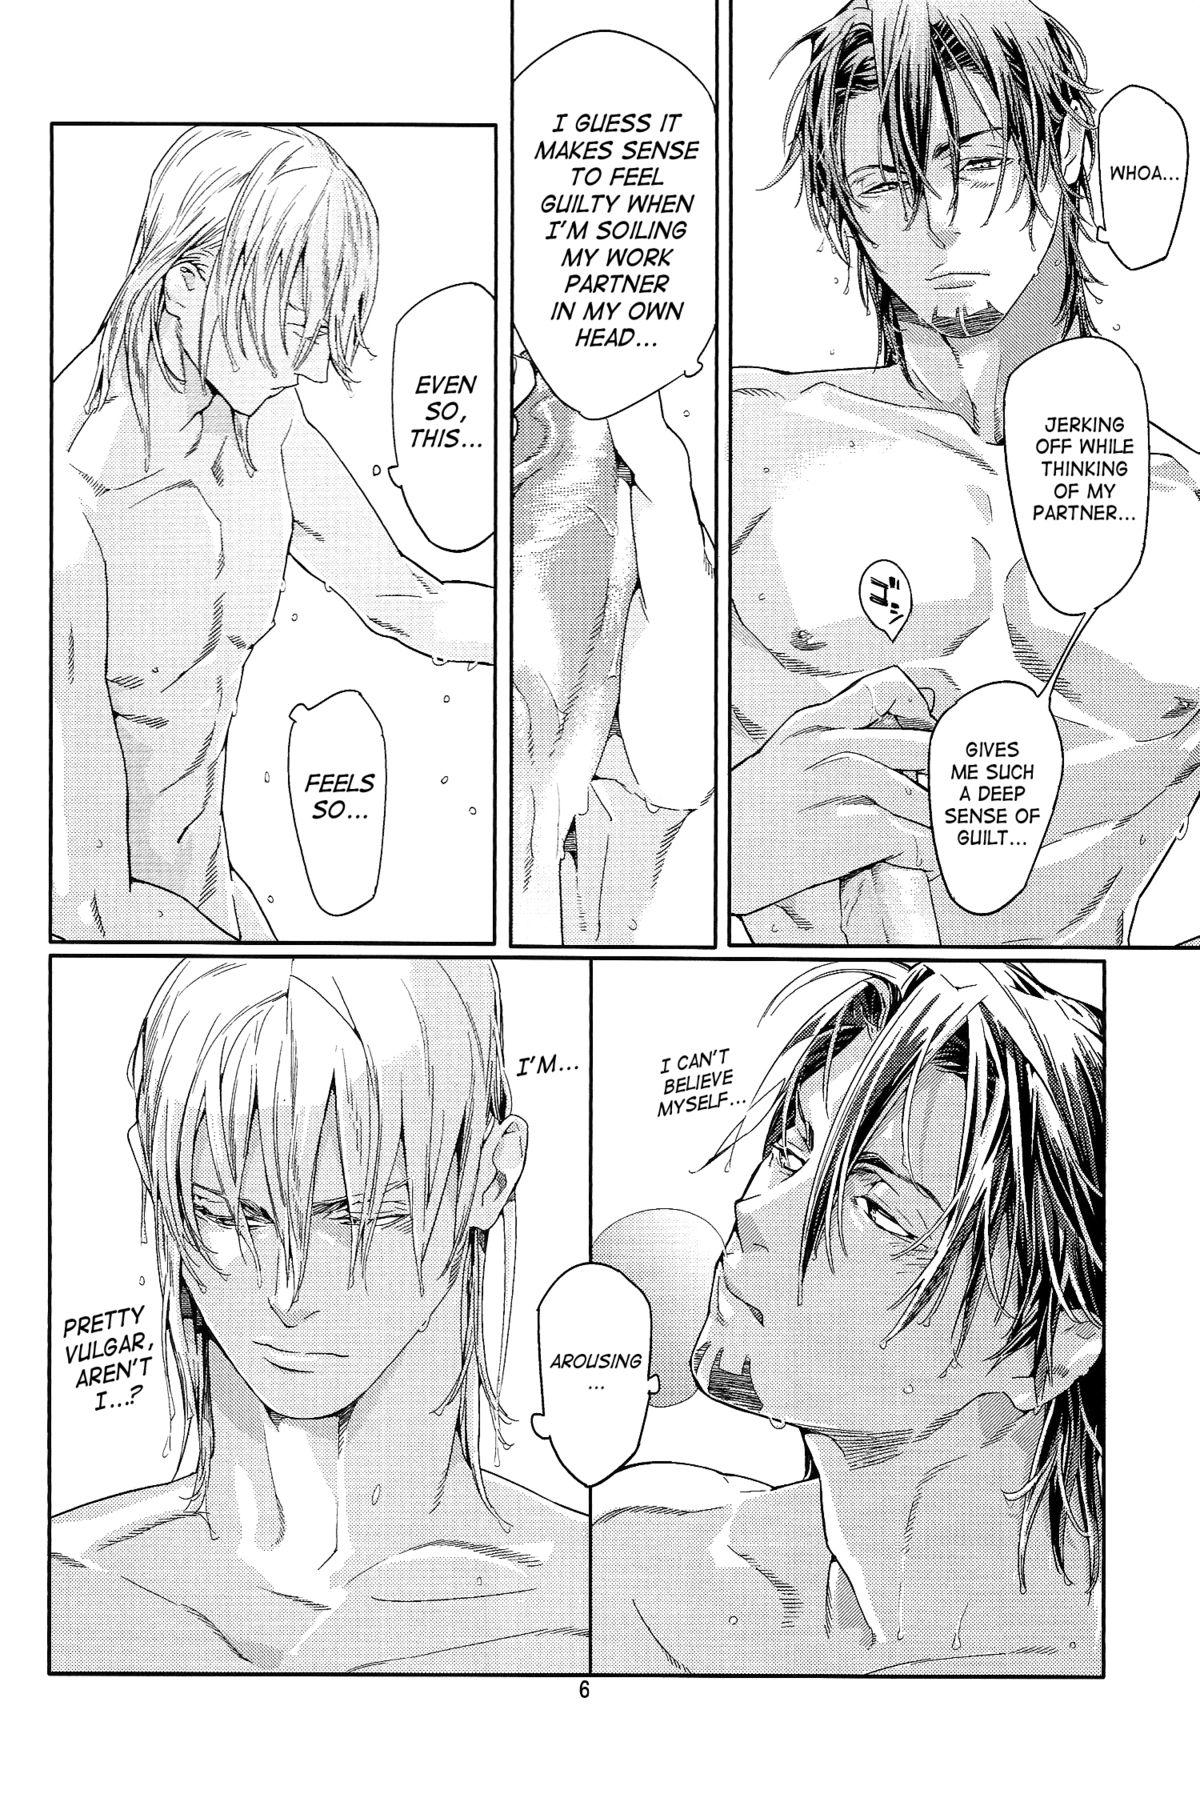 Double Blowjob CANDY MAN Vol. 3 - Tiger and bunny From - Page 4